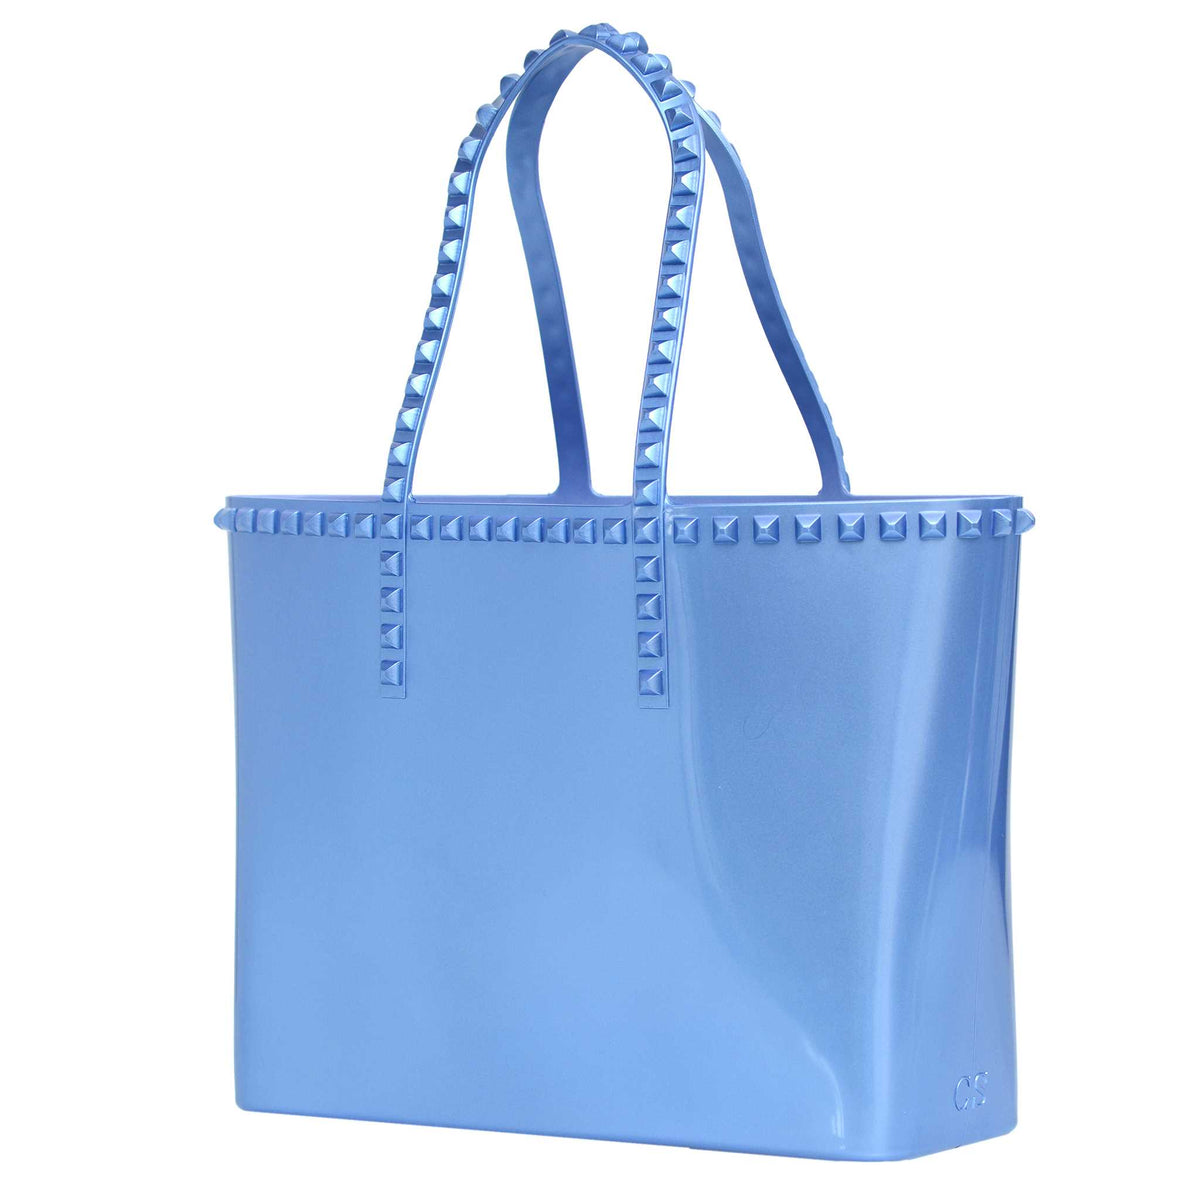 Angelica Large Tote - Metallic Jelly